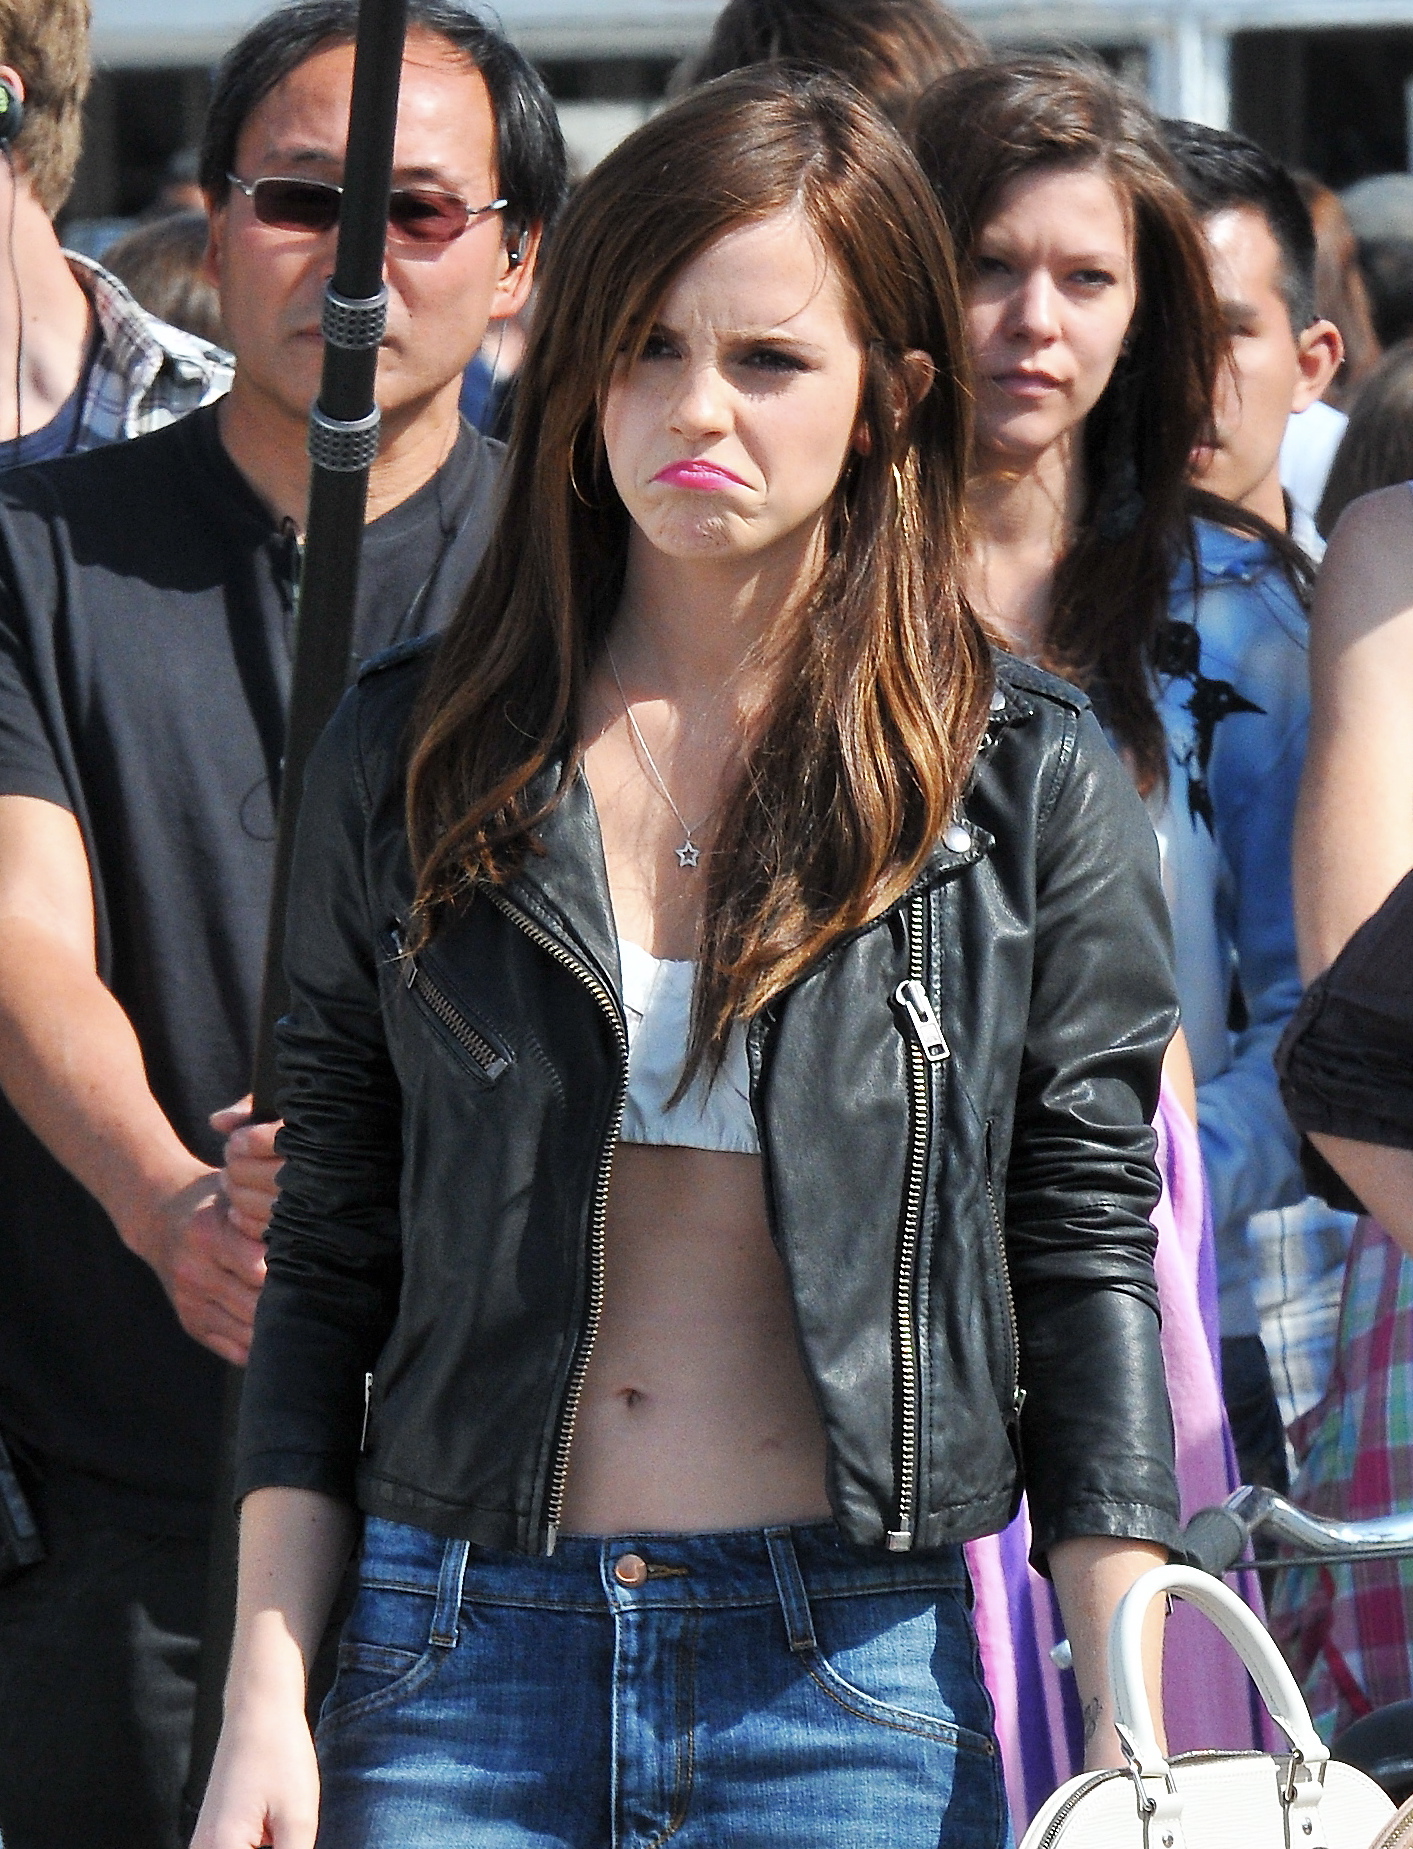 on-the-set-of-the-bling-ring-april-12-2012-emma-watson-30459685-1413-1849.jpg